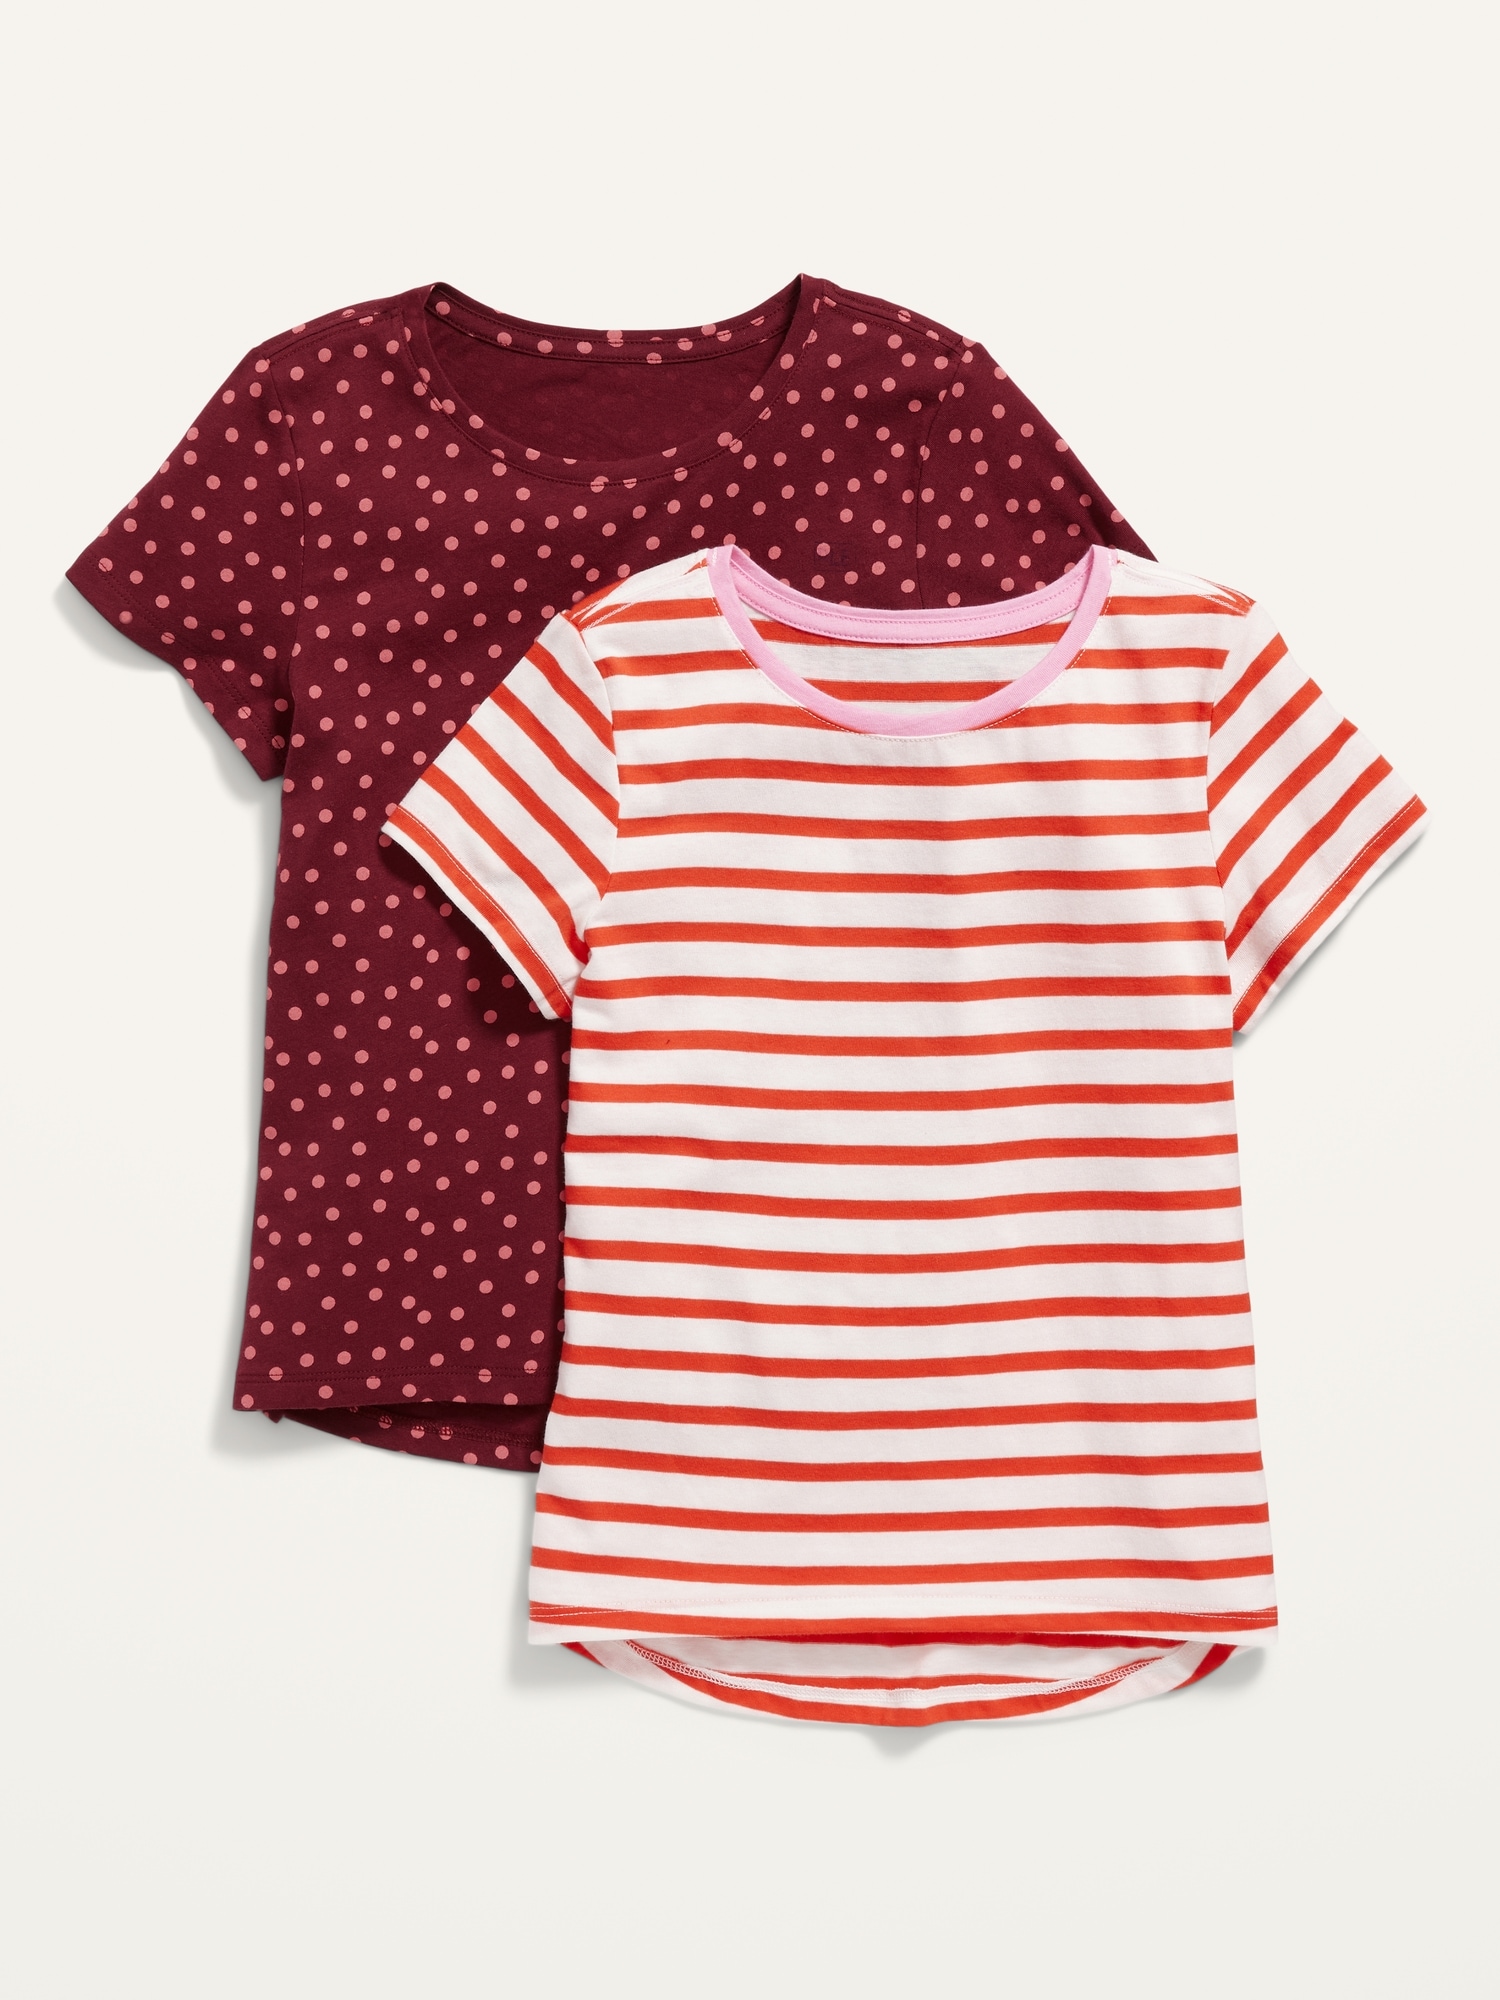 Softest T-Shirt Variety 2-Pack for Girls On Sale At Old Navy